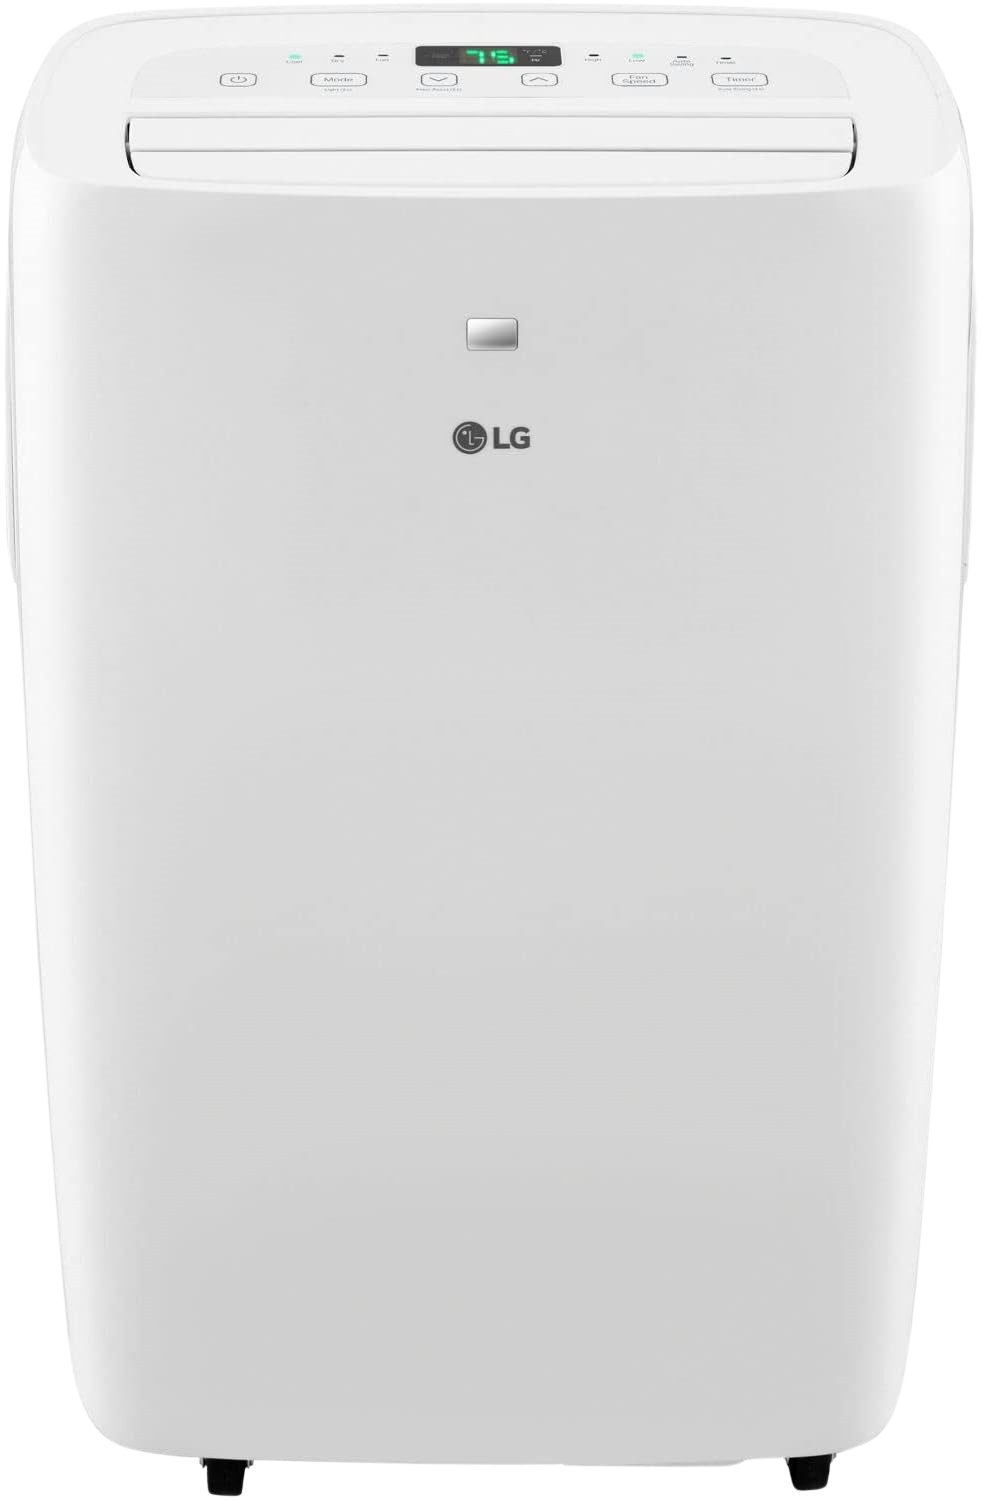 LG, LG 6,000 BTU Portable 3-In-1 Air Conditioner and Dehumidifier Covers 250 sq. ft. LCD Remote Manufacturer RFB